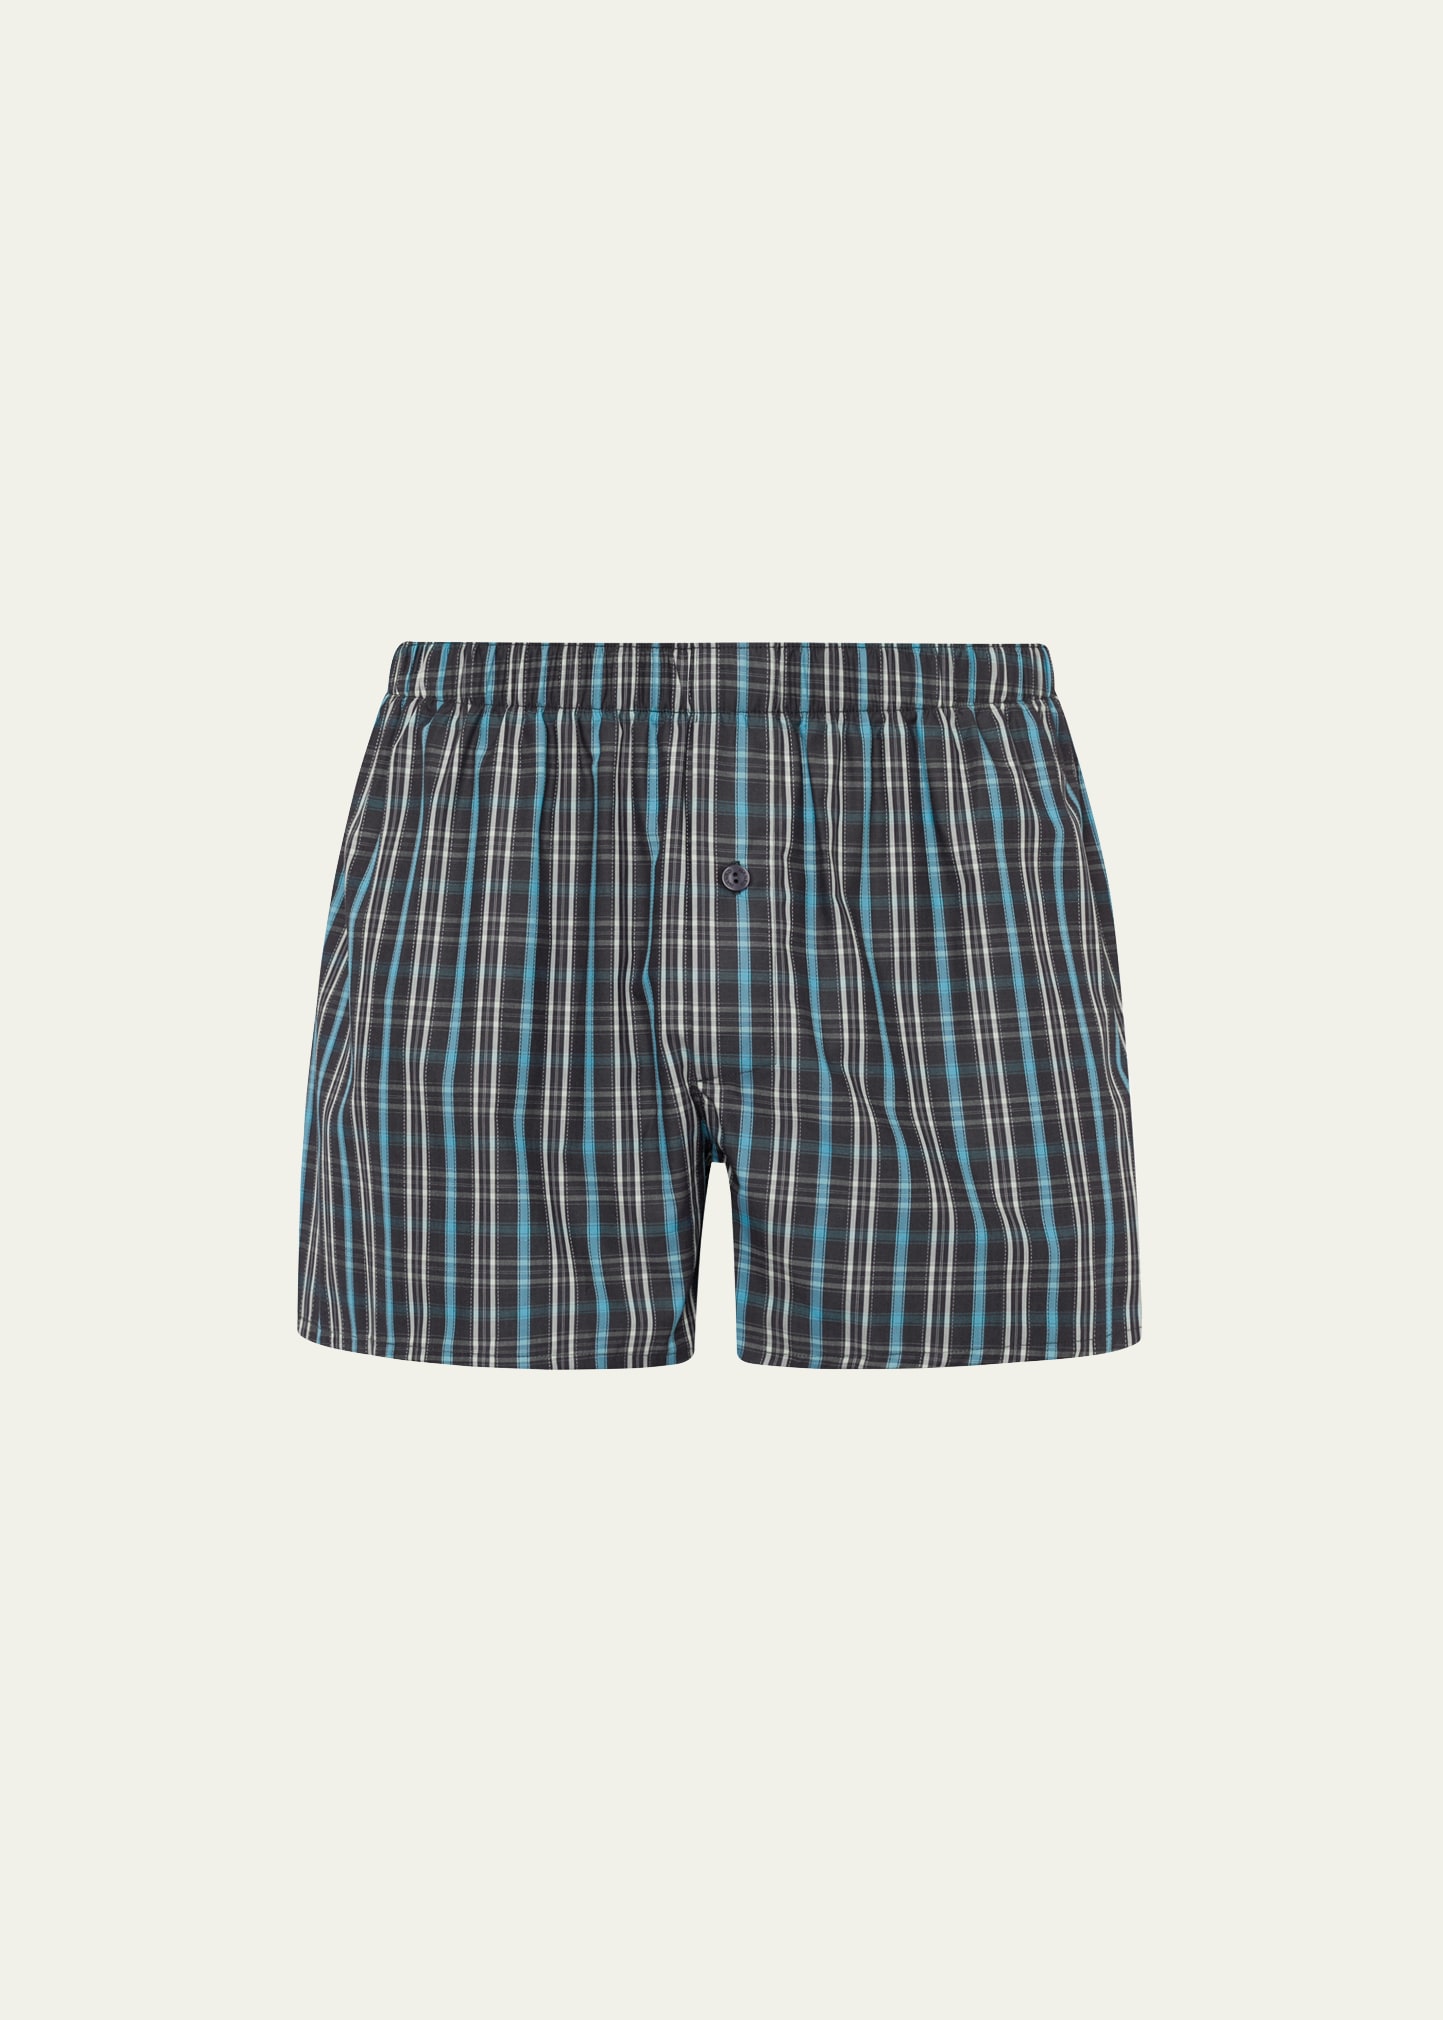 Hanro Fancy Woven Boxers In Arctic Plaid Check